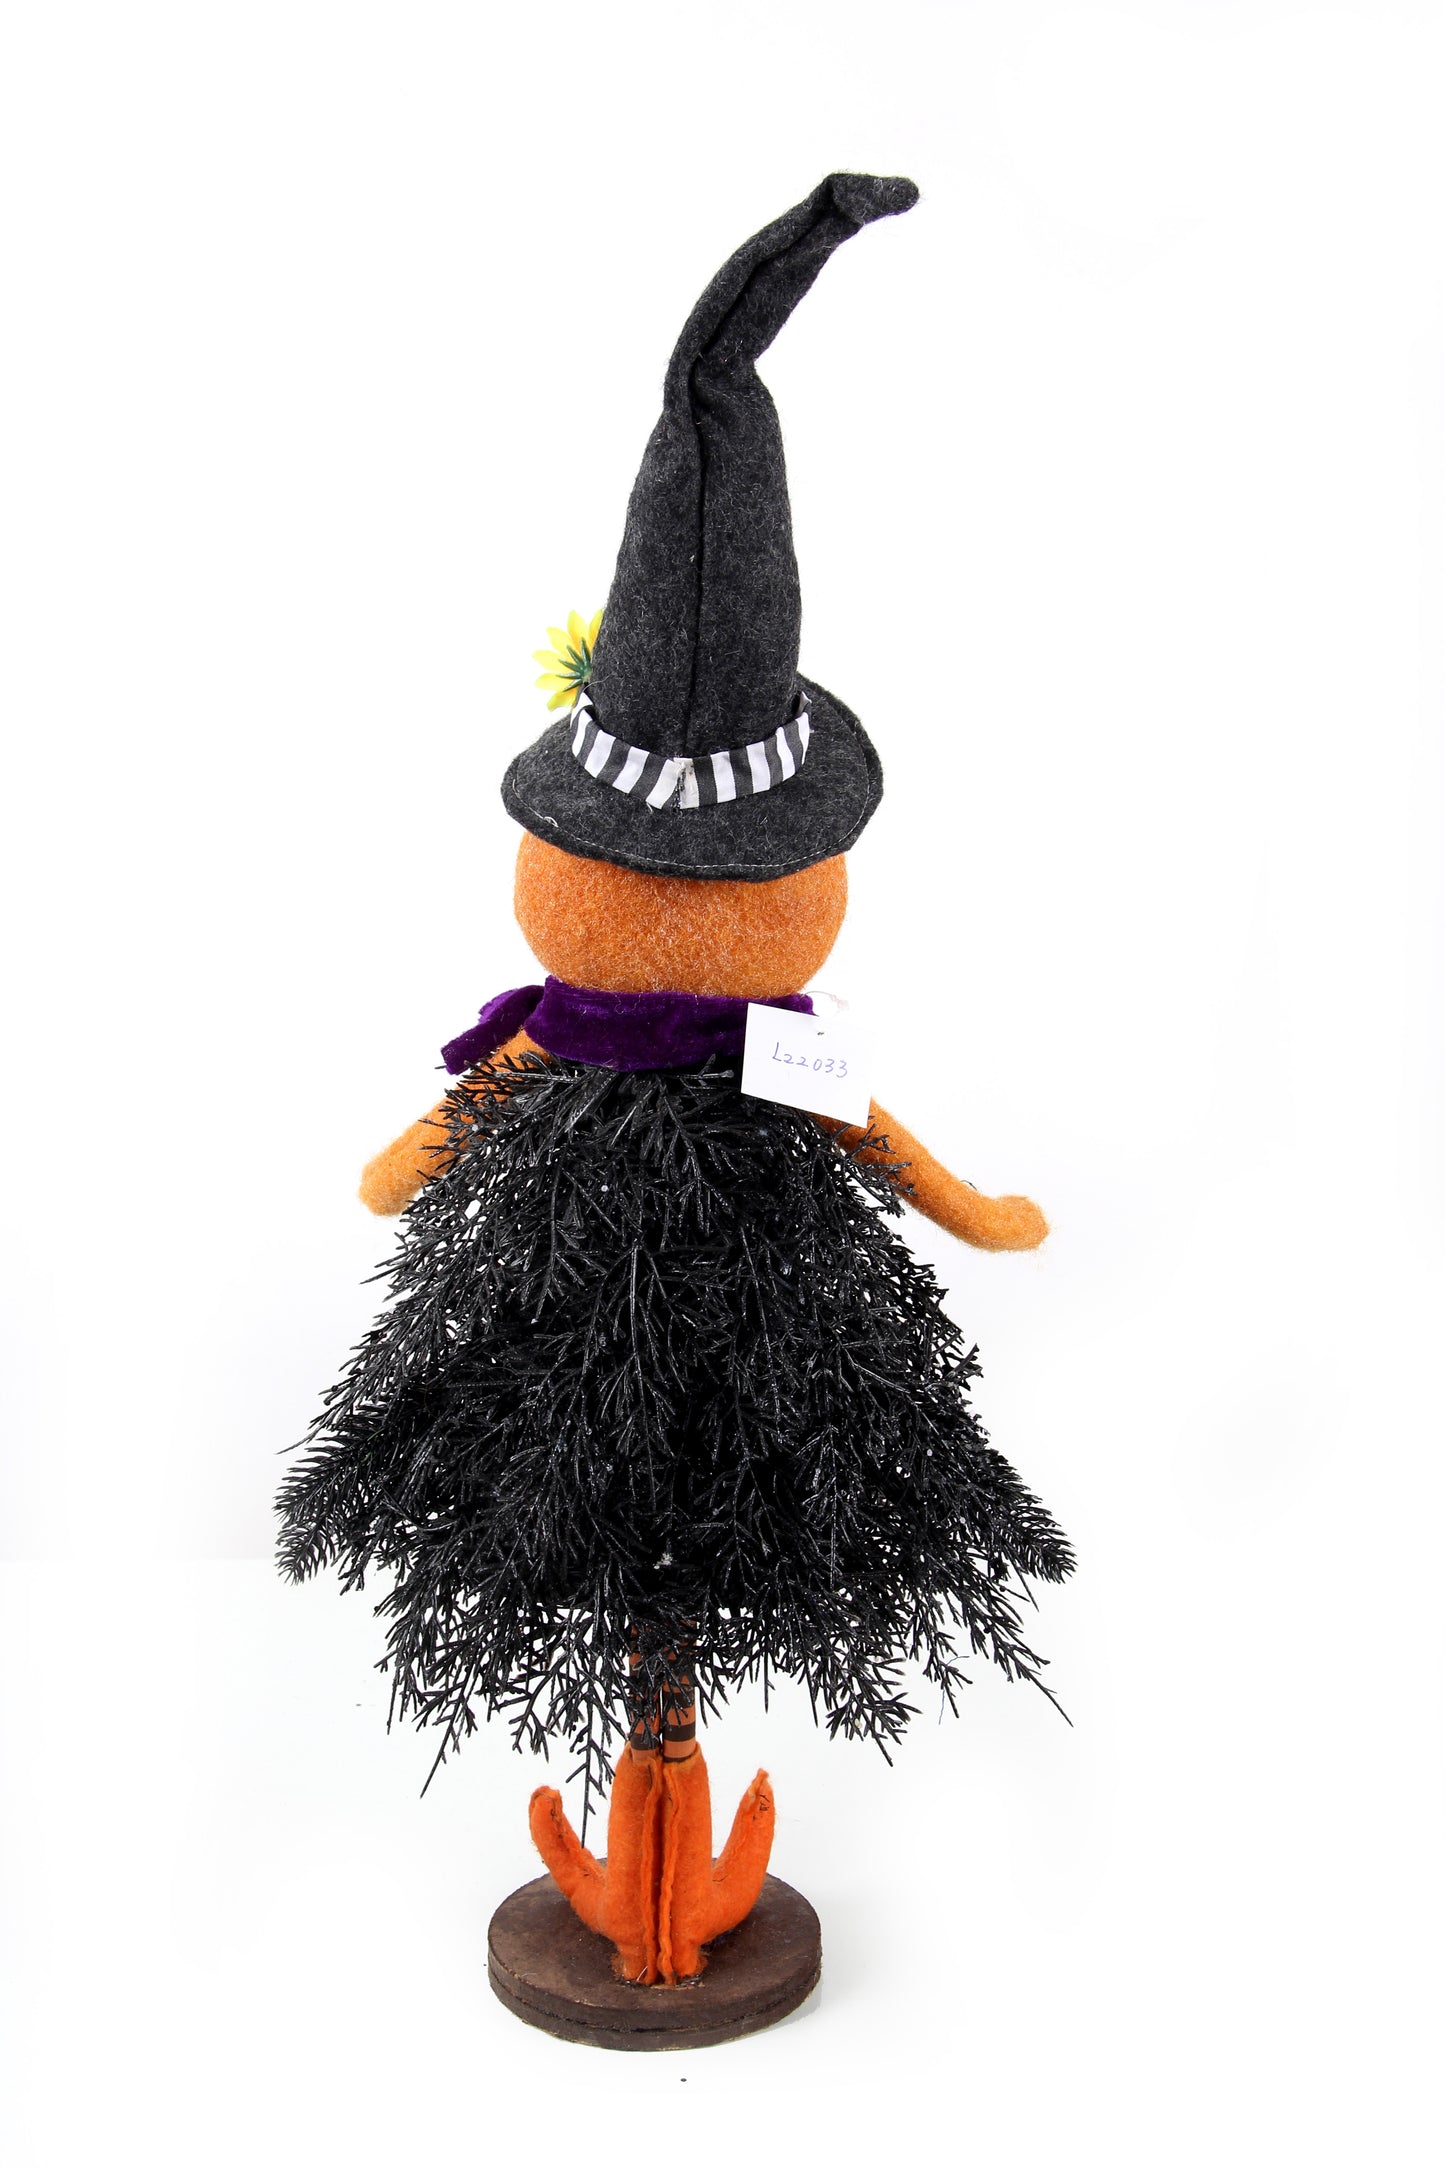 Hand Made Halloween Scary Dolls Scarecrow Pumpkin Grimace Doll For Festival Decoration